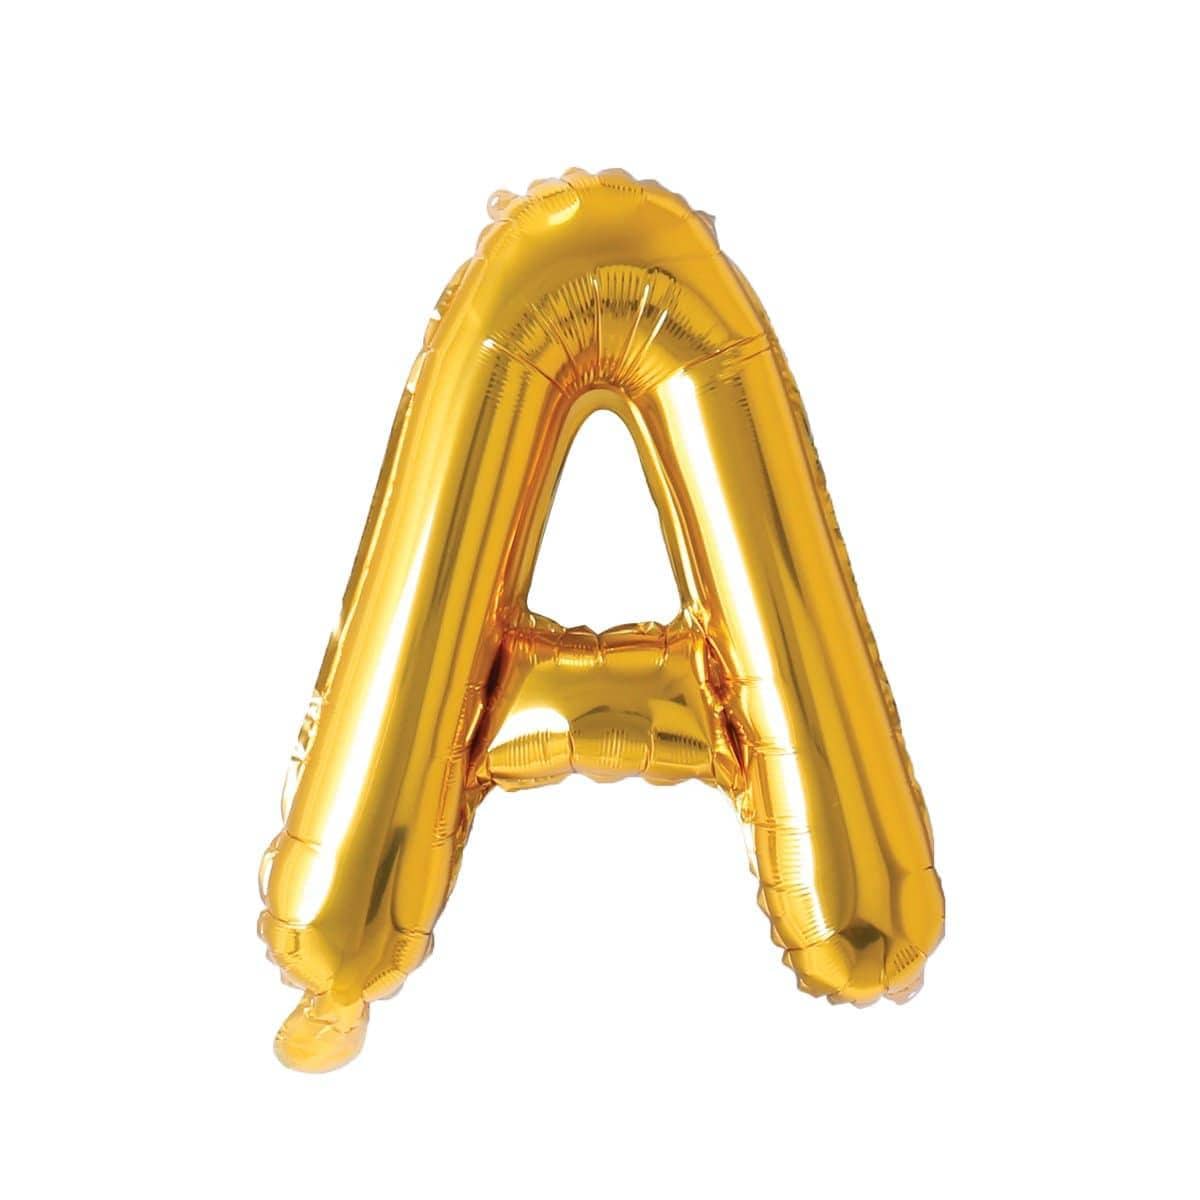 Buy Balloons Gold Letter A Foil Balloon, 16 Inches sold at Party Expert